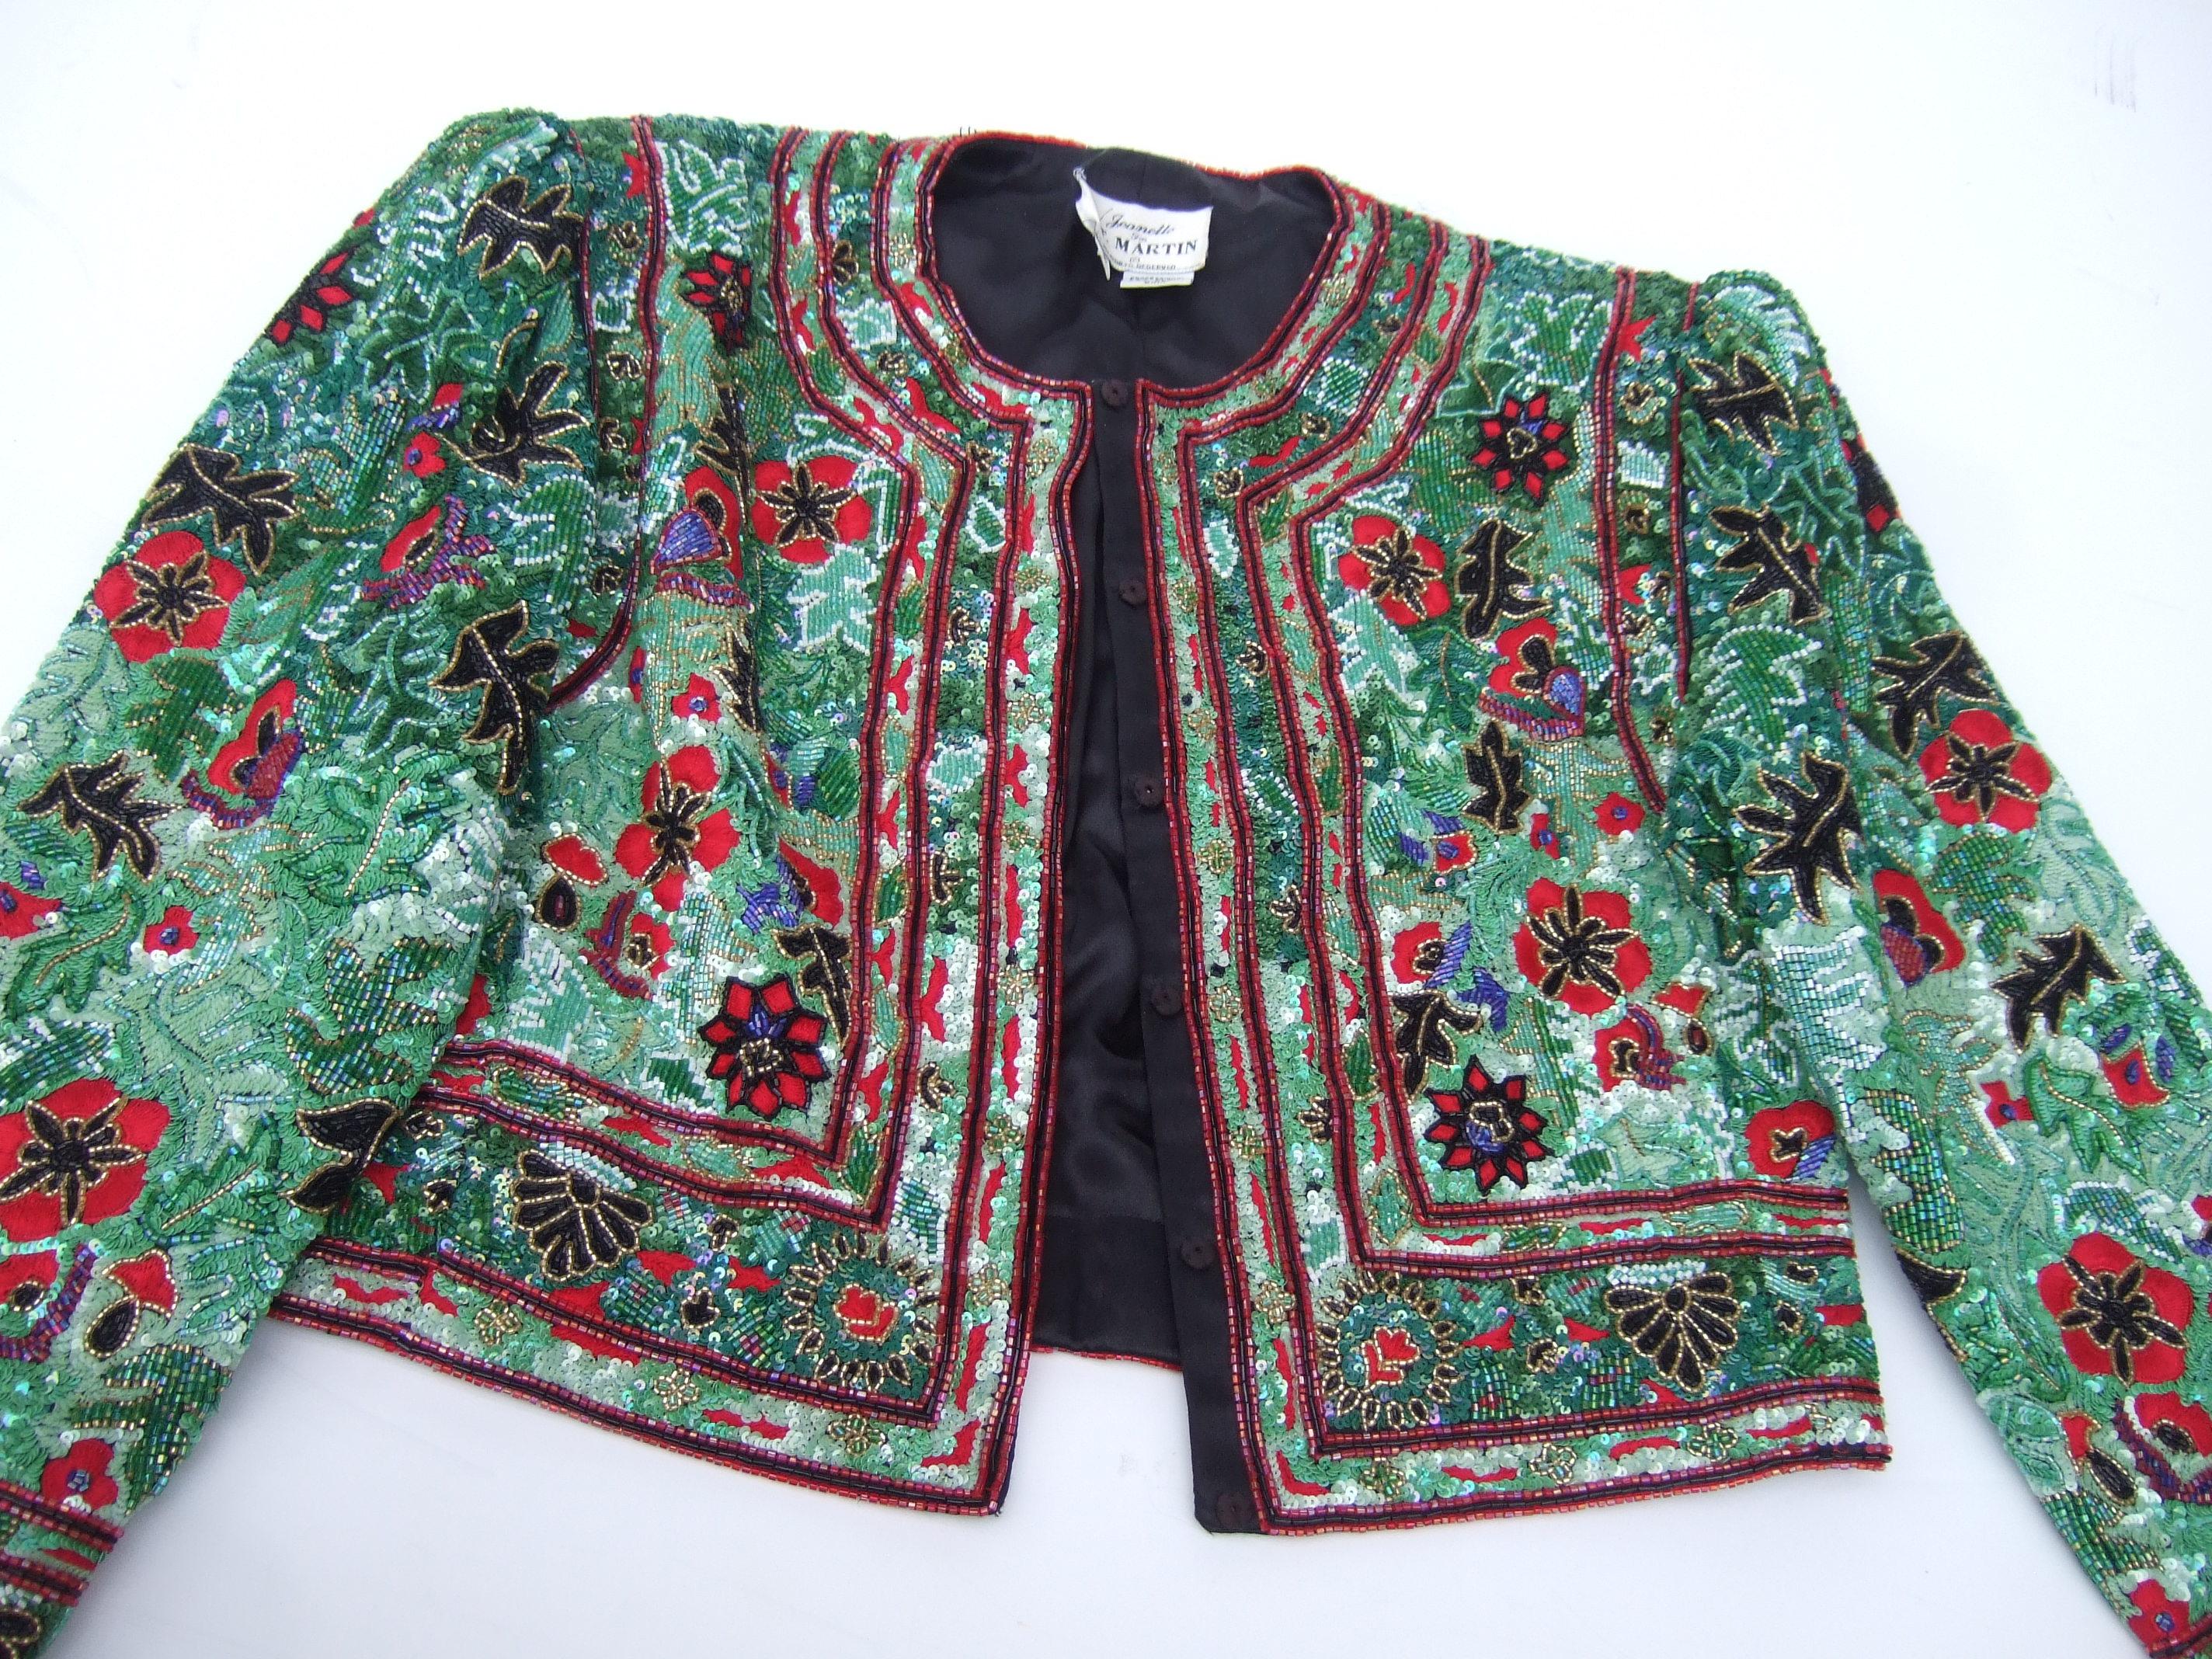 Exquisite Elaborate Glass Floral Beaded Embroidered Bolero Jacket c 1980s For Sale 13